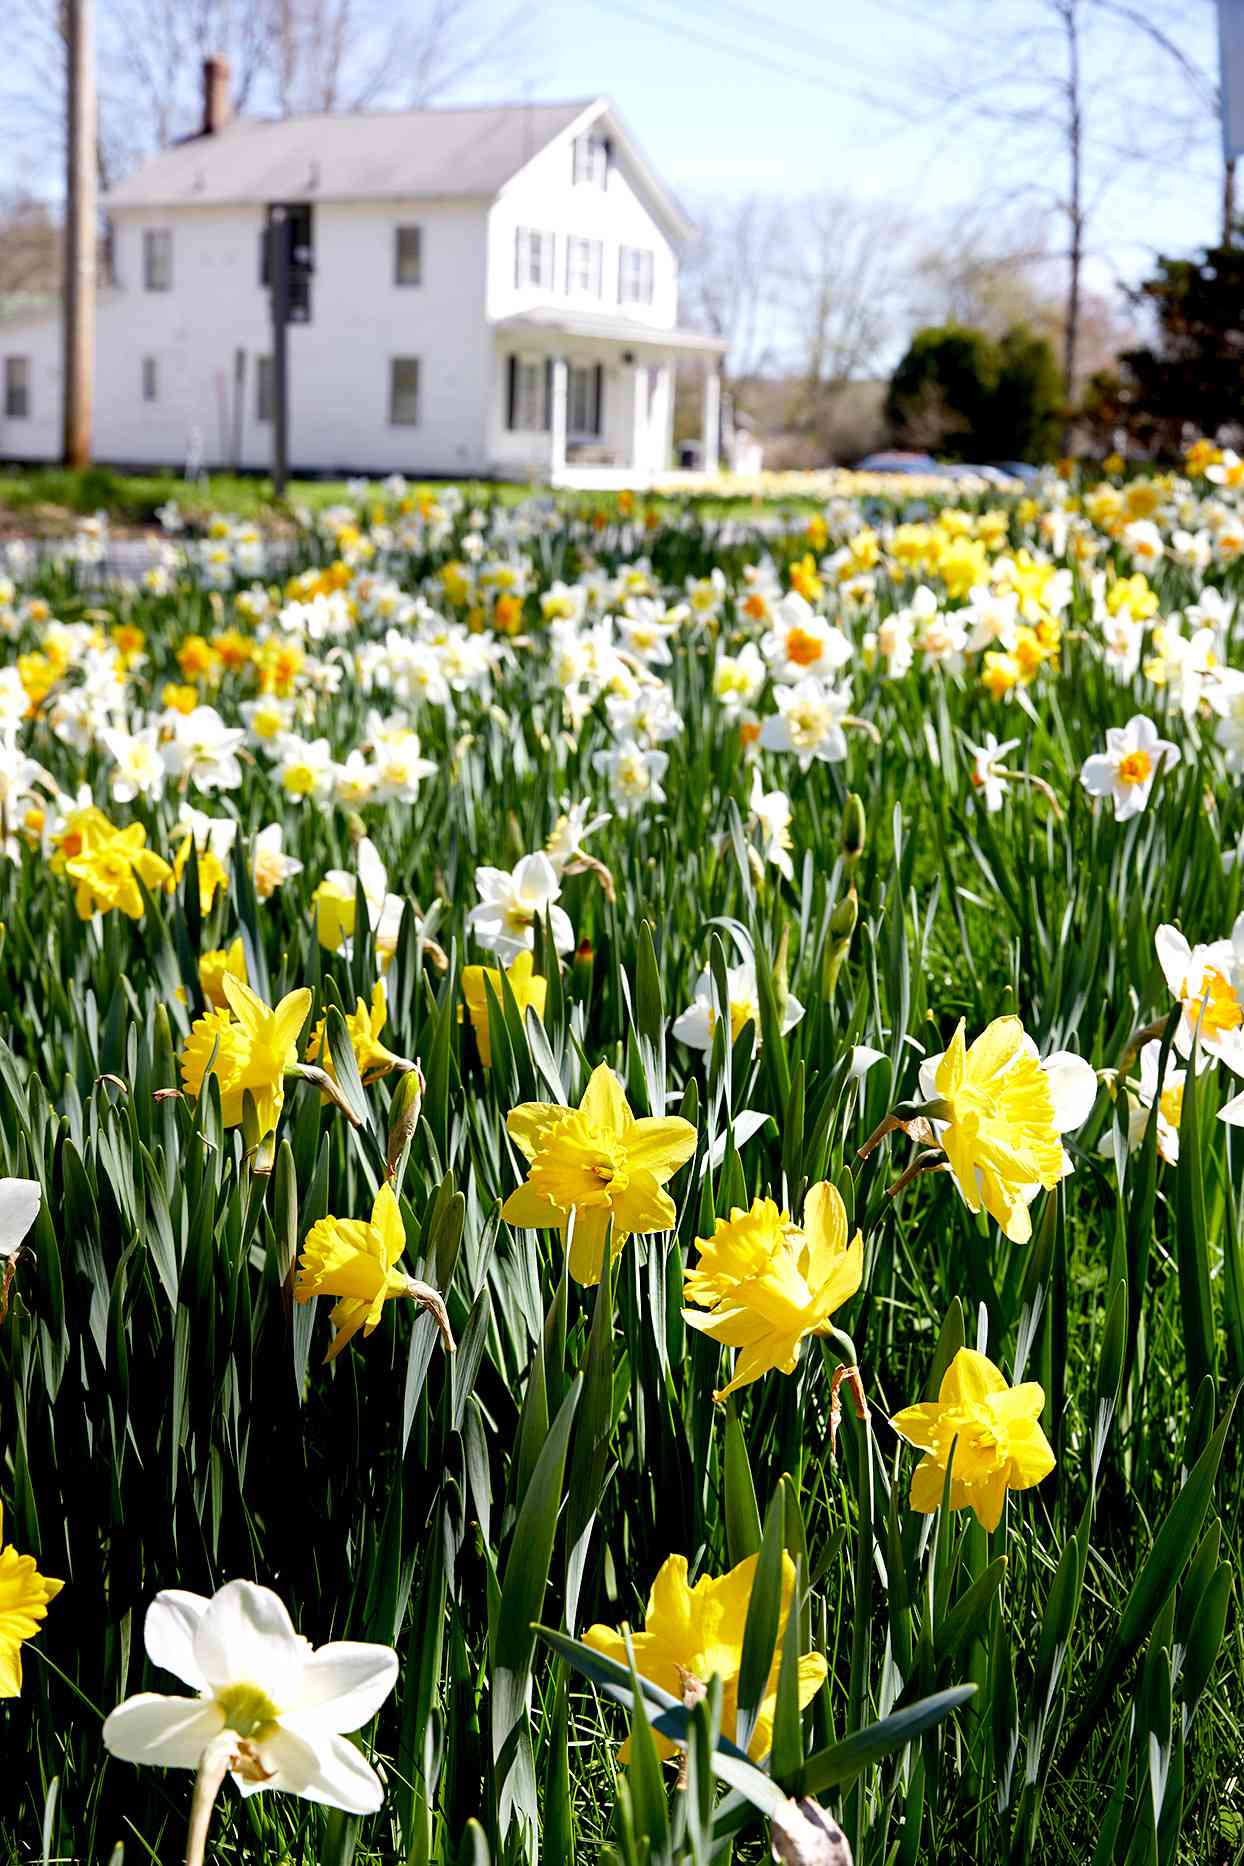 Daffodils with country house